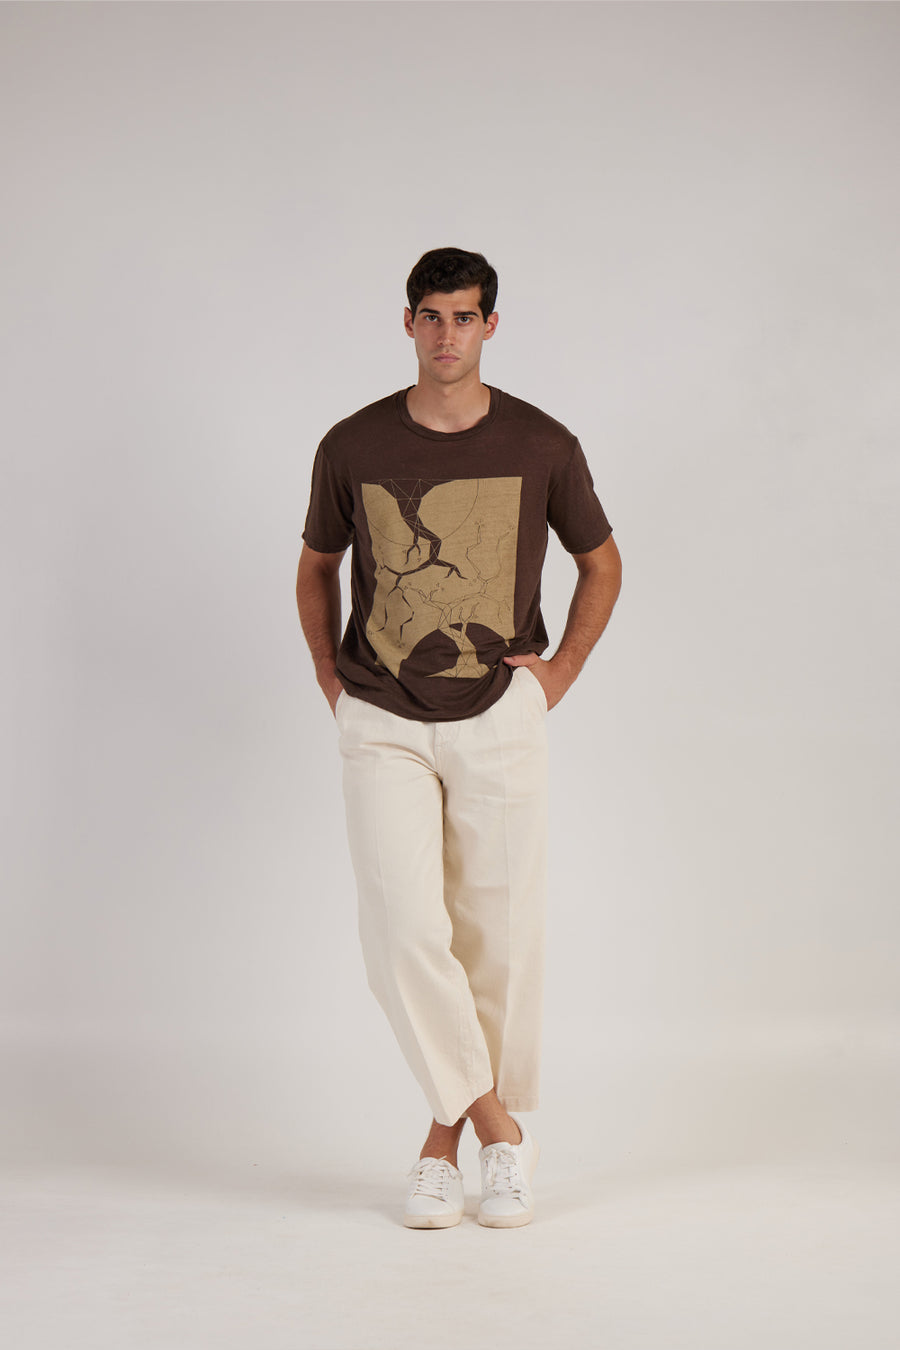 Buy the Daniele Fiesoli Linen Graphic T-Shirt in Brown at Intro. Spend £50 for free UK delivery. Official stockists. We ship worldwide.